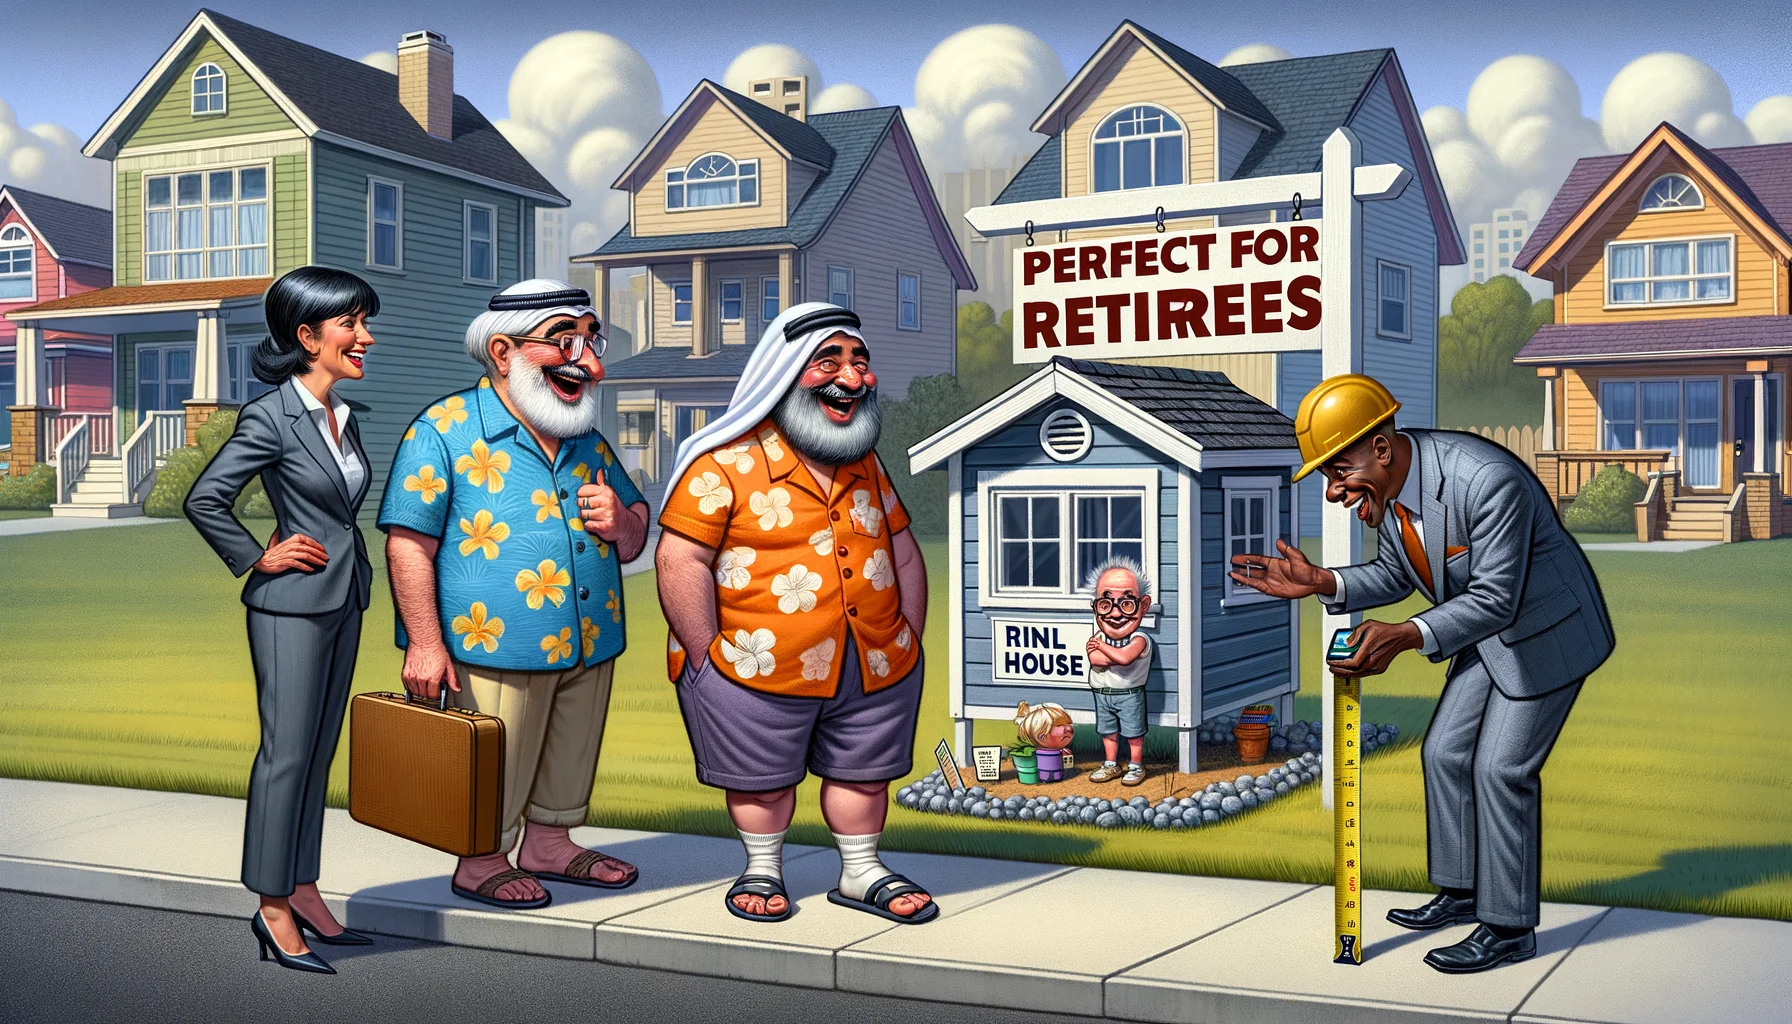 A whimsical and humorous scene in a suburban neighborhood. A Middle-Eastern elderly couple, wearing Hawaiian shirts and Bermuda shorts, are looking at a tiny house labeled 'perfect for retirees'. On the other side, a real estate agent, a Caucasian woman in a business suit, is trying to convince them with a big smile. Meanwhile, a Black senior man wearing a construction hat is measuring a dollhouse next to it and laughing heartily, implying the exaggeration of the 'tiny' concept for retirees. The scene reflects the humorous side of home buying for retirees.